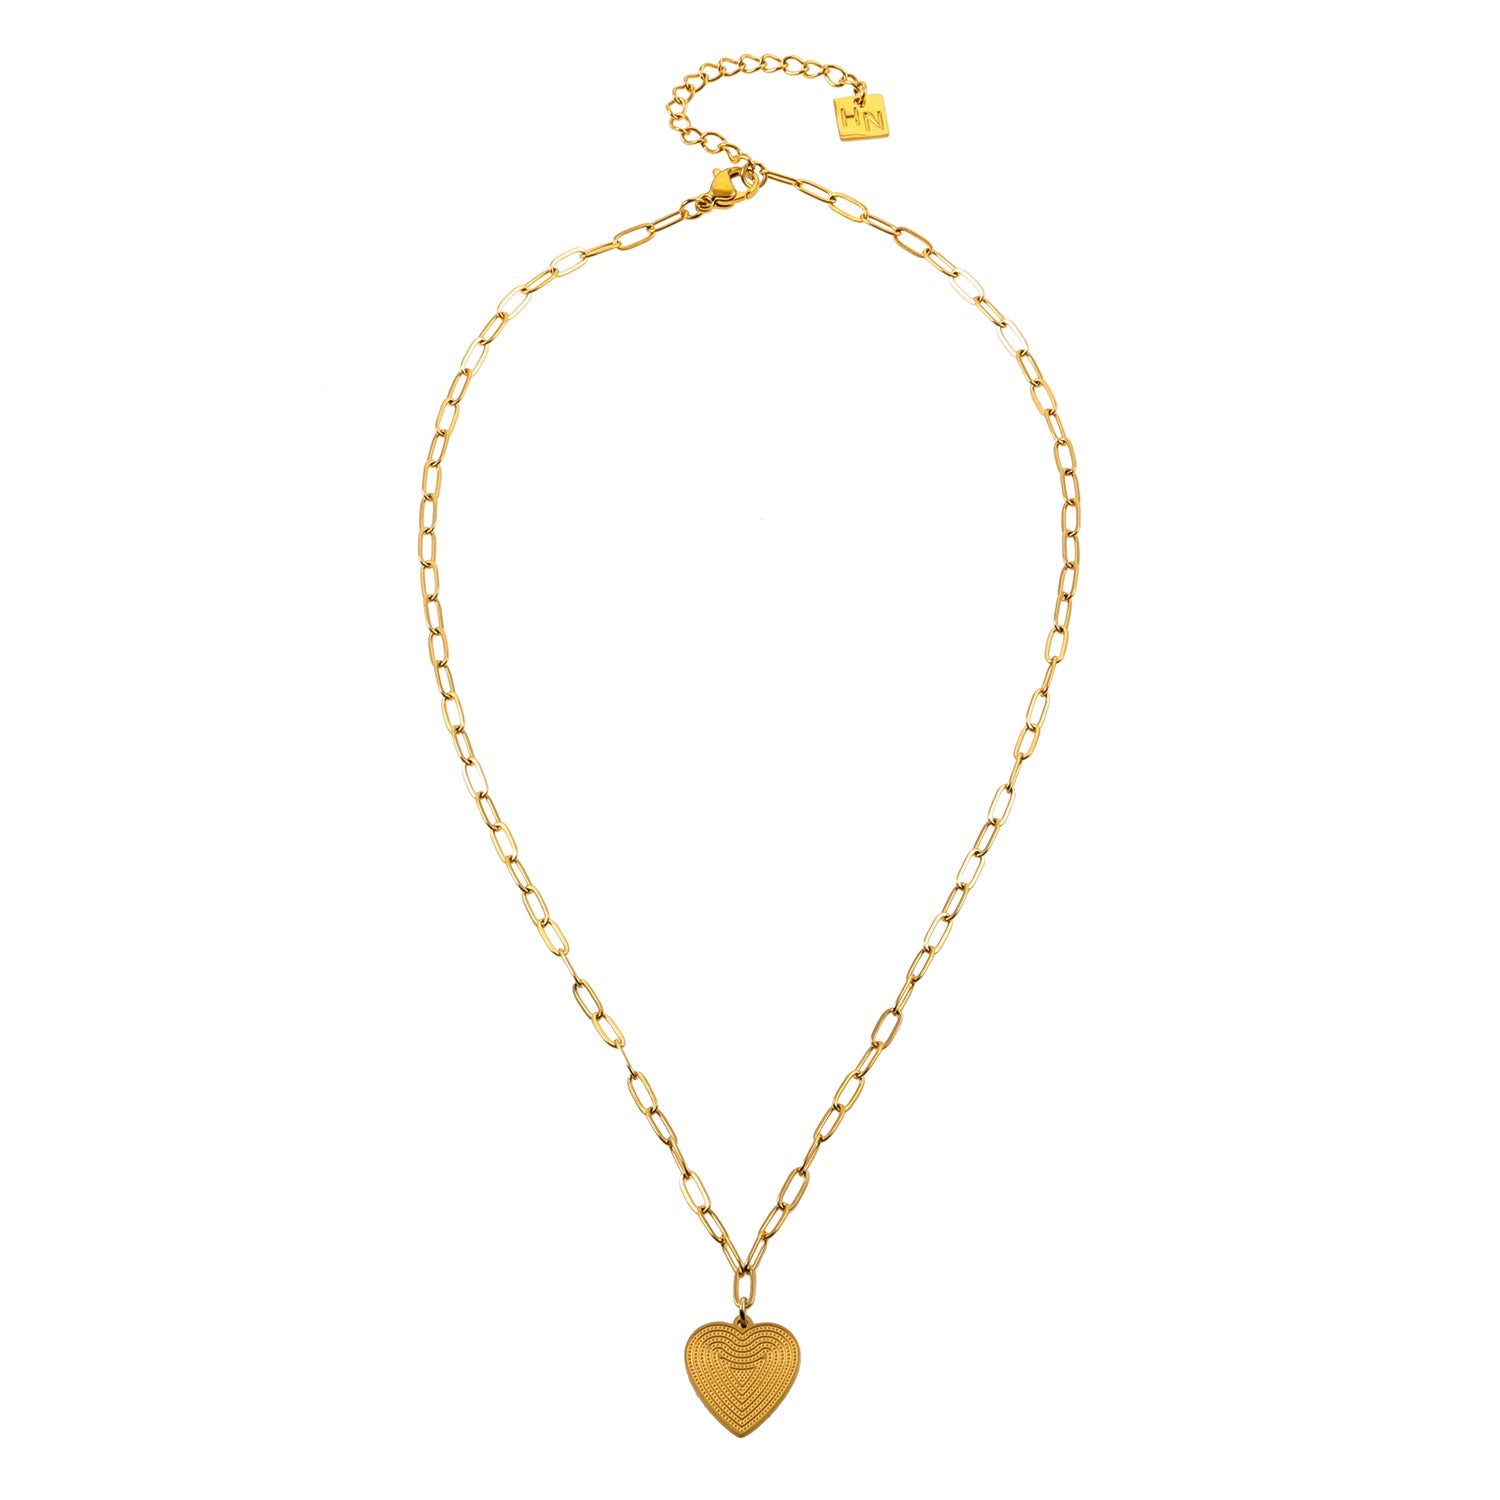 Style ALARA 03515: Mini Paper Clip Chain Anchoring a Patterned Heart Charm